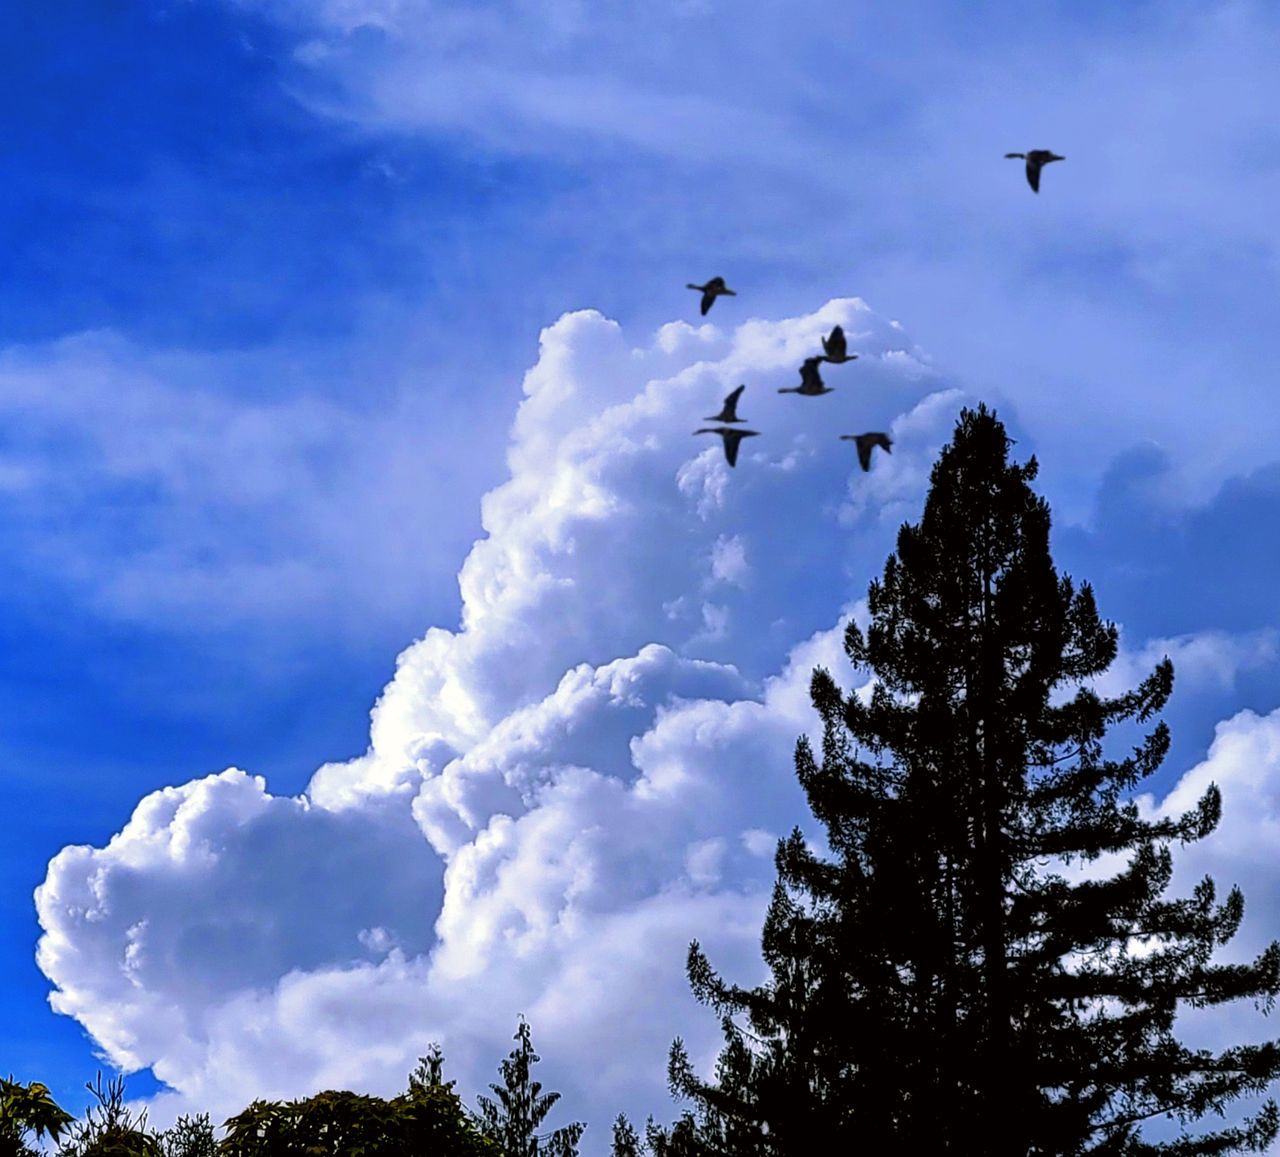 sky, cloud, flying, tree, bird, animal, animal themes, nature, animal wildlife, wildlife, mountain, plant, silhouette, beauty in nature, group of animals, low angle view, no people, blue, mountain range, scenics - nature, outdoors, day, environment, mid-air, forest, snow, flock of birds